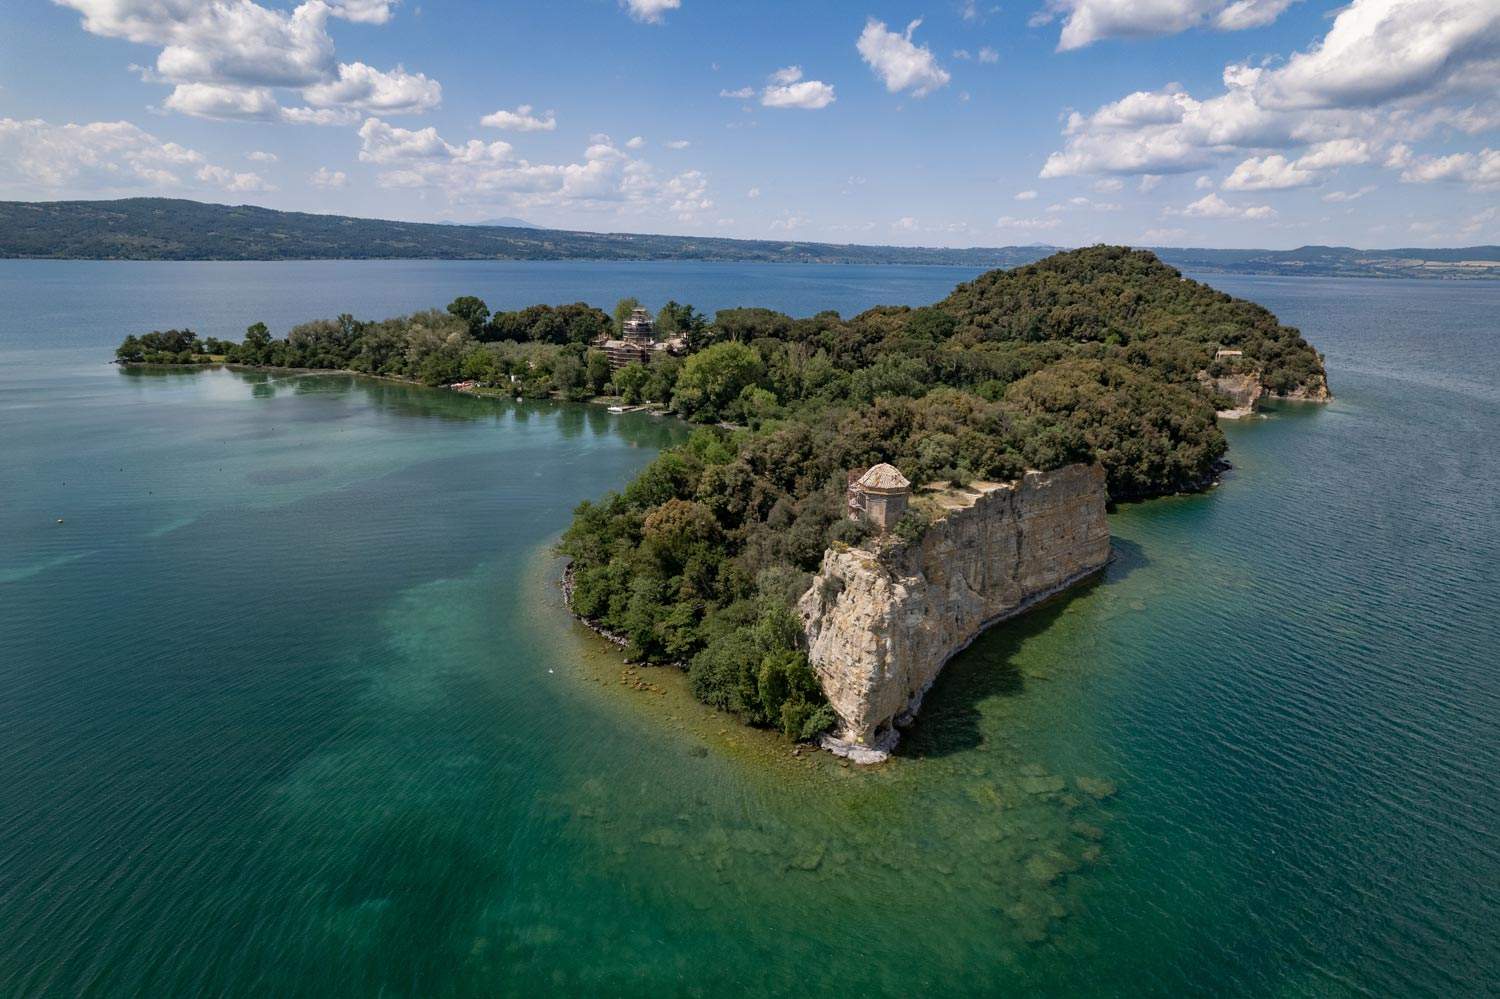 Bisentina Island, what to see on the largest island of Lake Bolsena